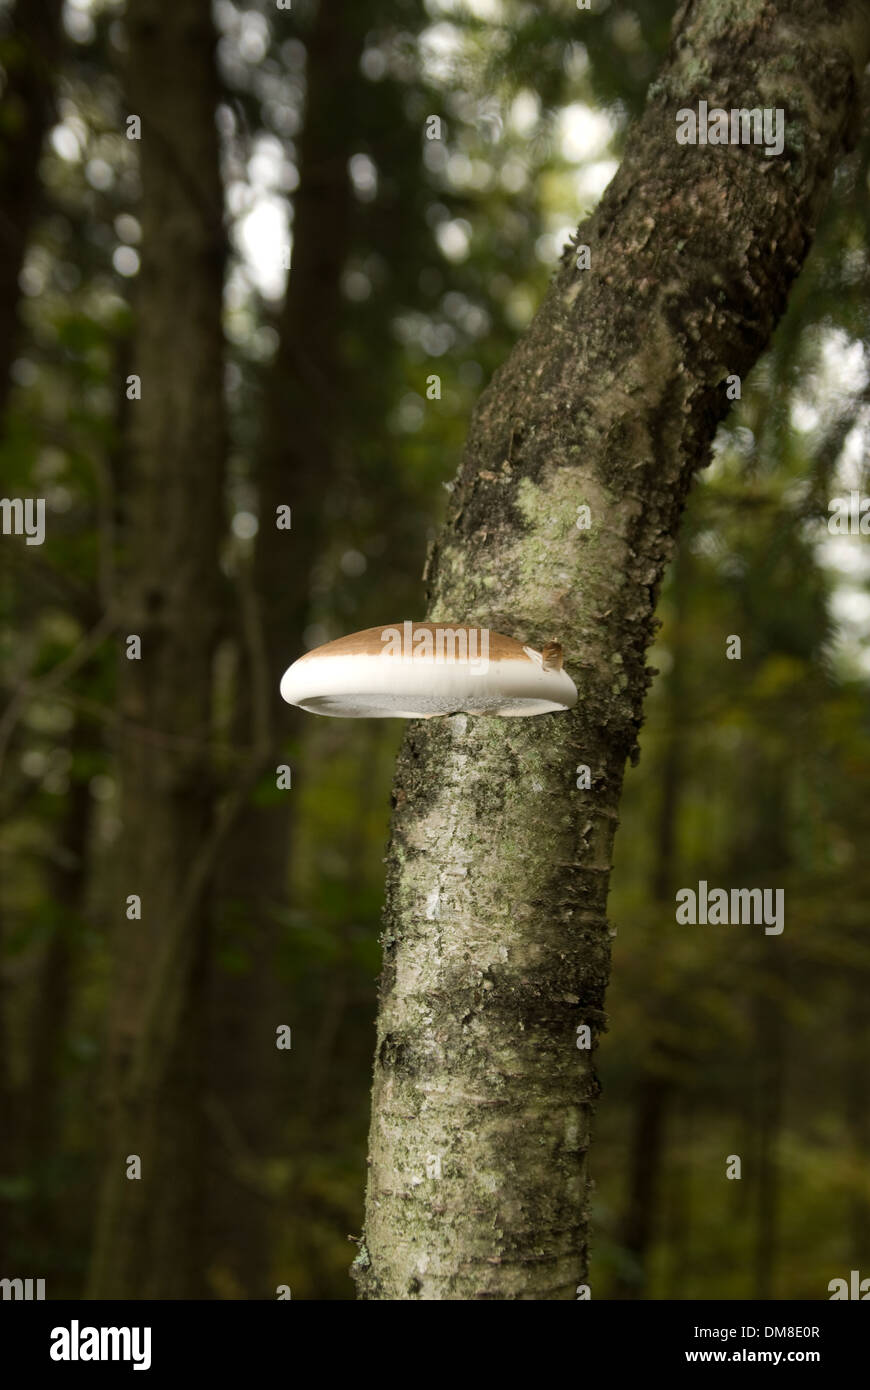 Fungus growing on a tree in a forest Stock Photo